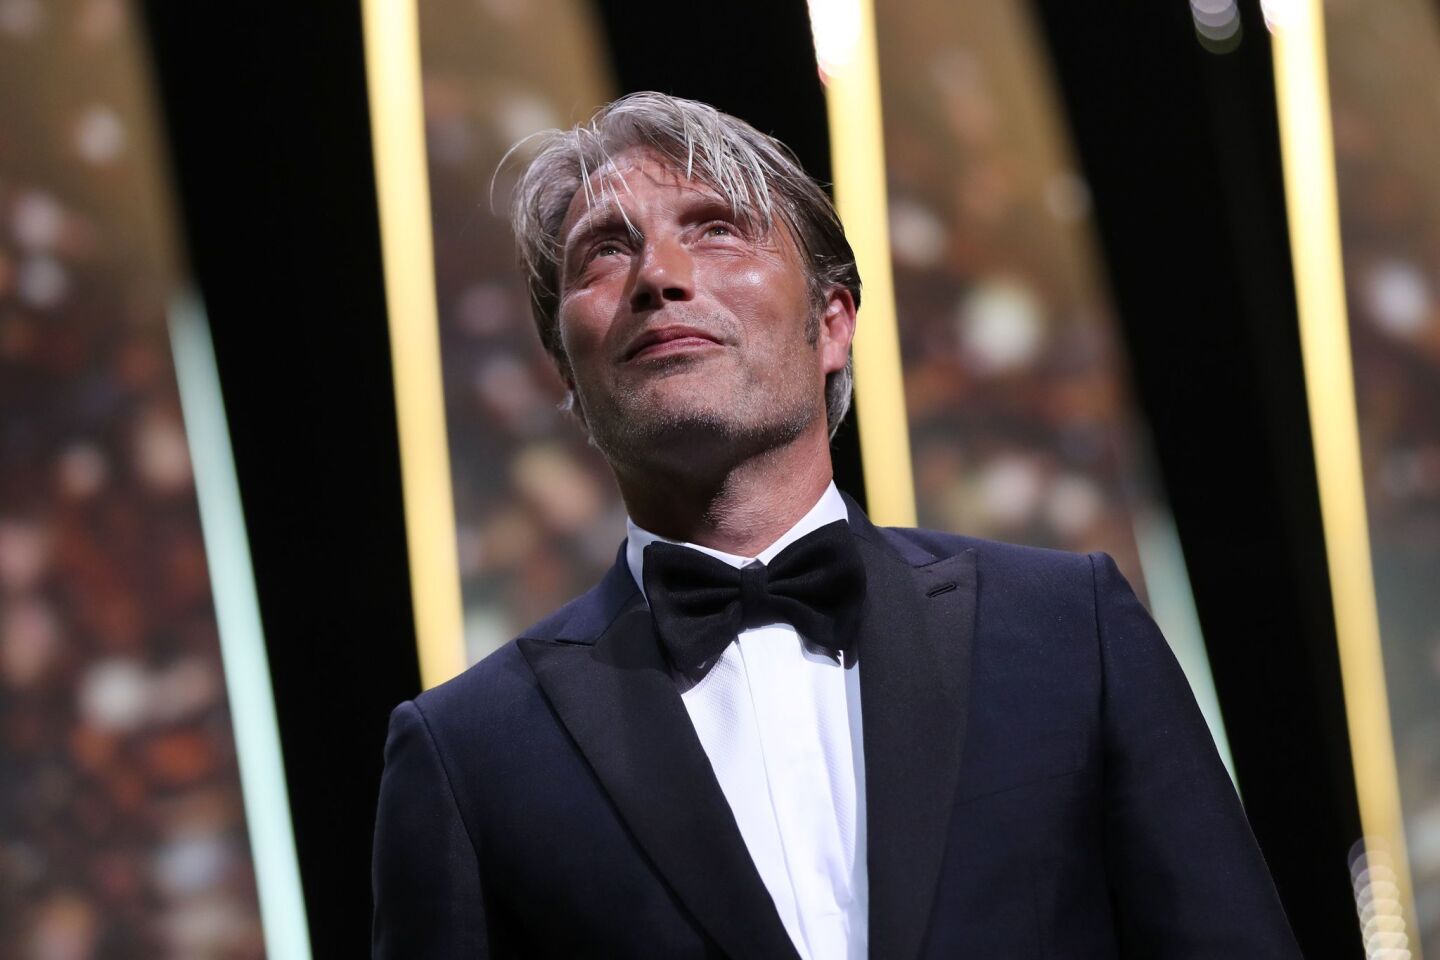 Actor and festival juror Mads Mikkelsen appears on stage during the opening ceremony of the Cannes Film Festival on Wednesday.